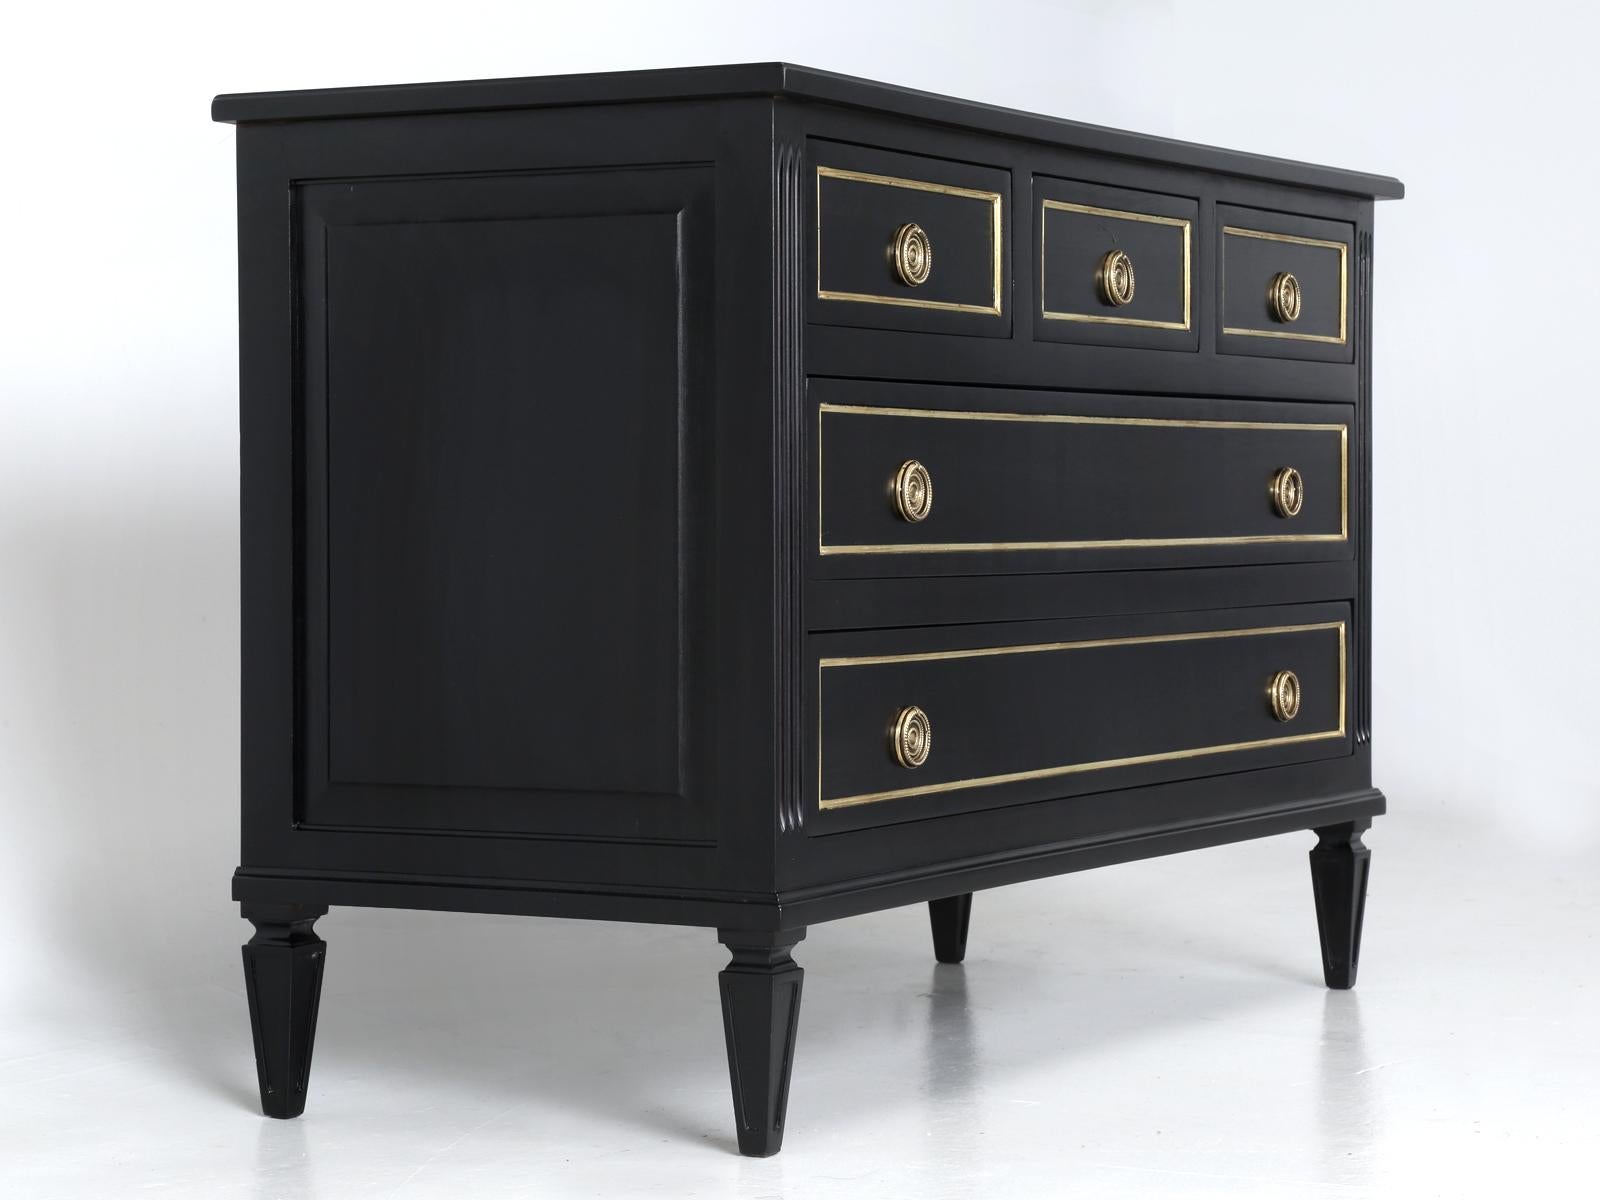 French Louis XVI style commode or dresser, that our Ola Plank restoration department hand-sanded to the bare wood and applied an old school ebonized finish. Although not a true antique, this was a very well-constructed, Louis XVI style commode,